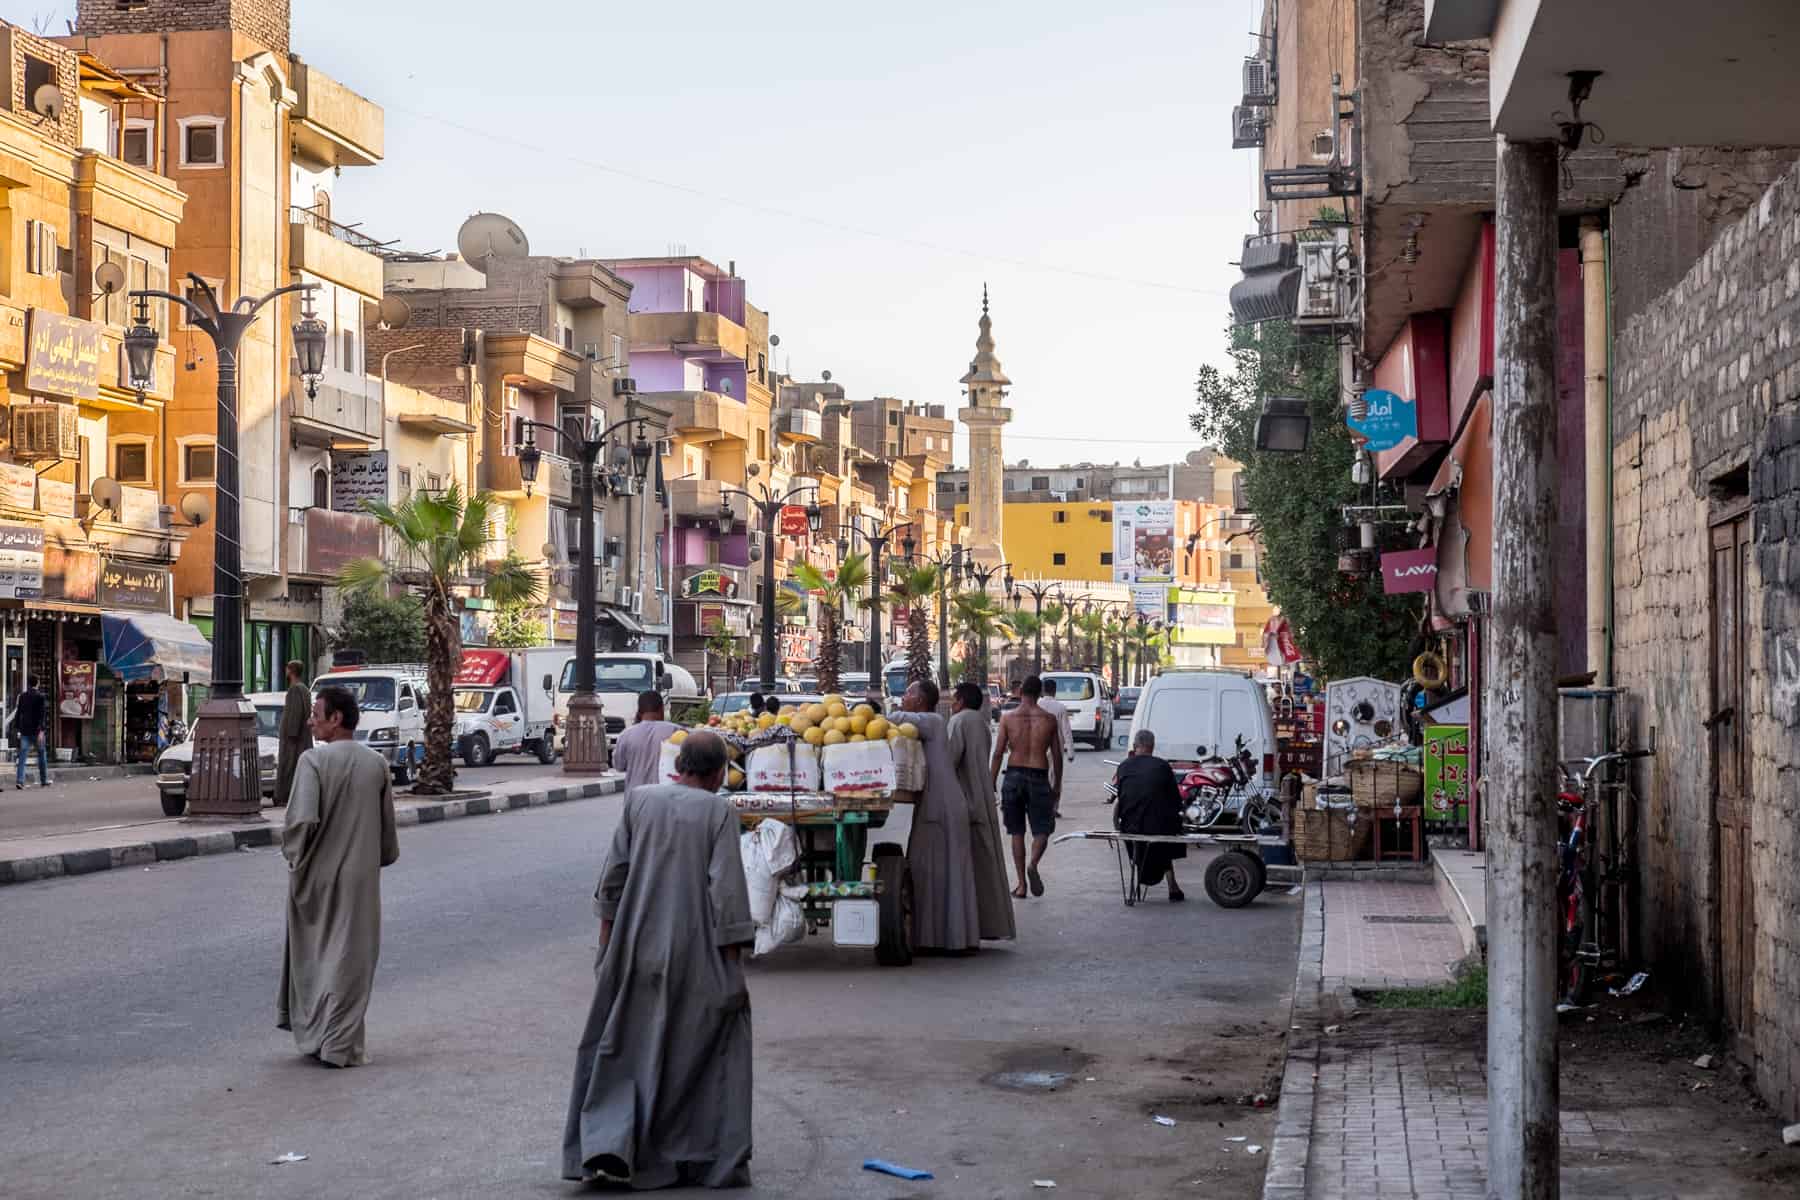 Egyptian men wearing long grey tunics walk past a fruit stall vendor on a wide golden lit apartment lined street in Luxor, Egypt